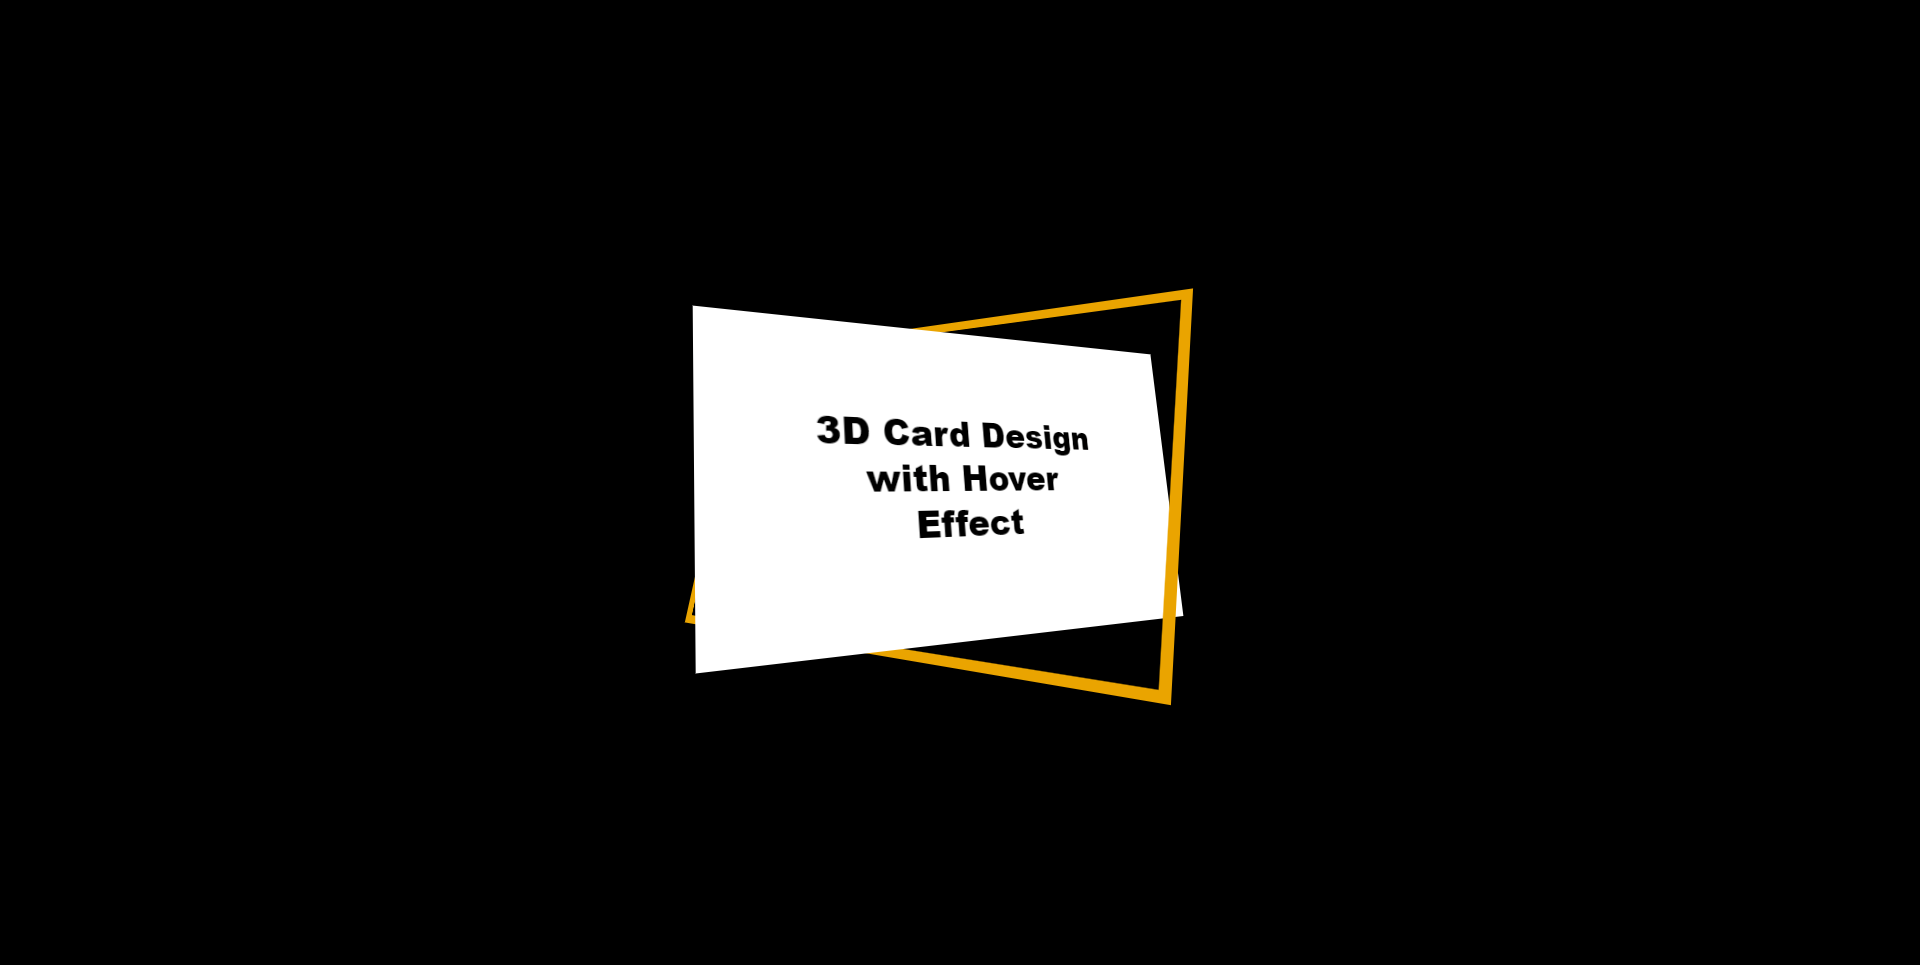 3D Card With Hover Effect only using HTML & CSS reference